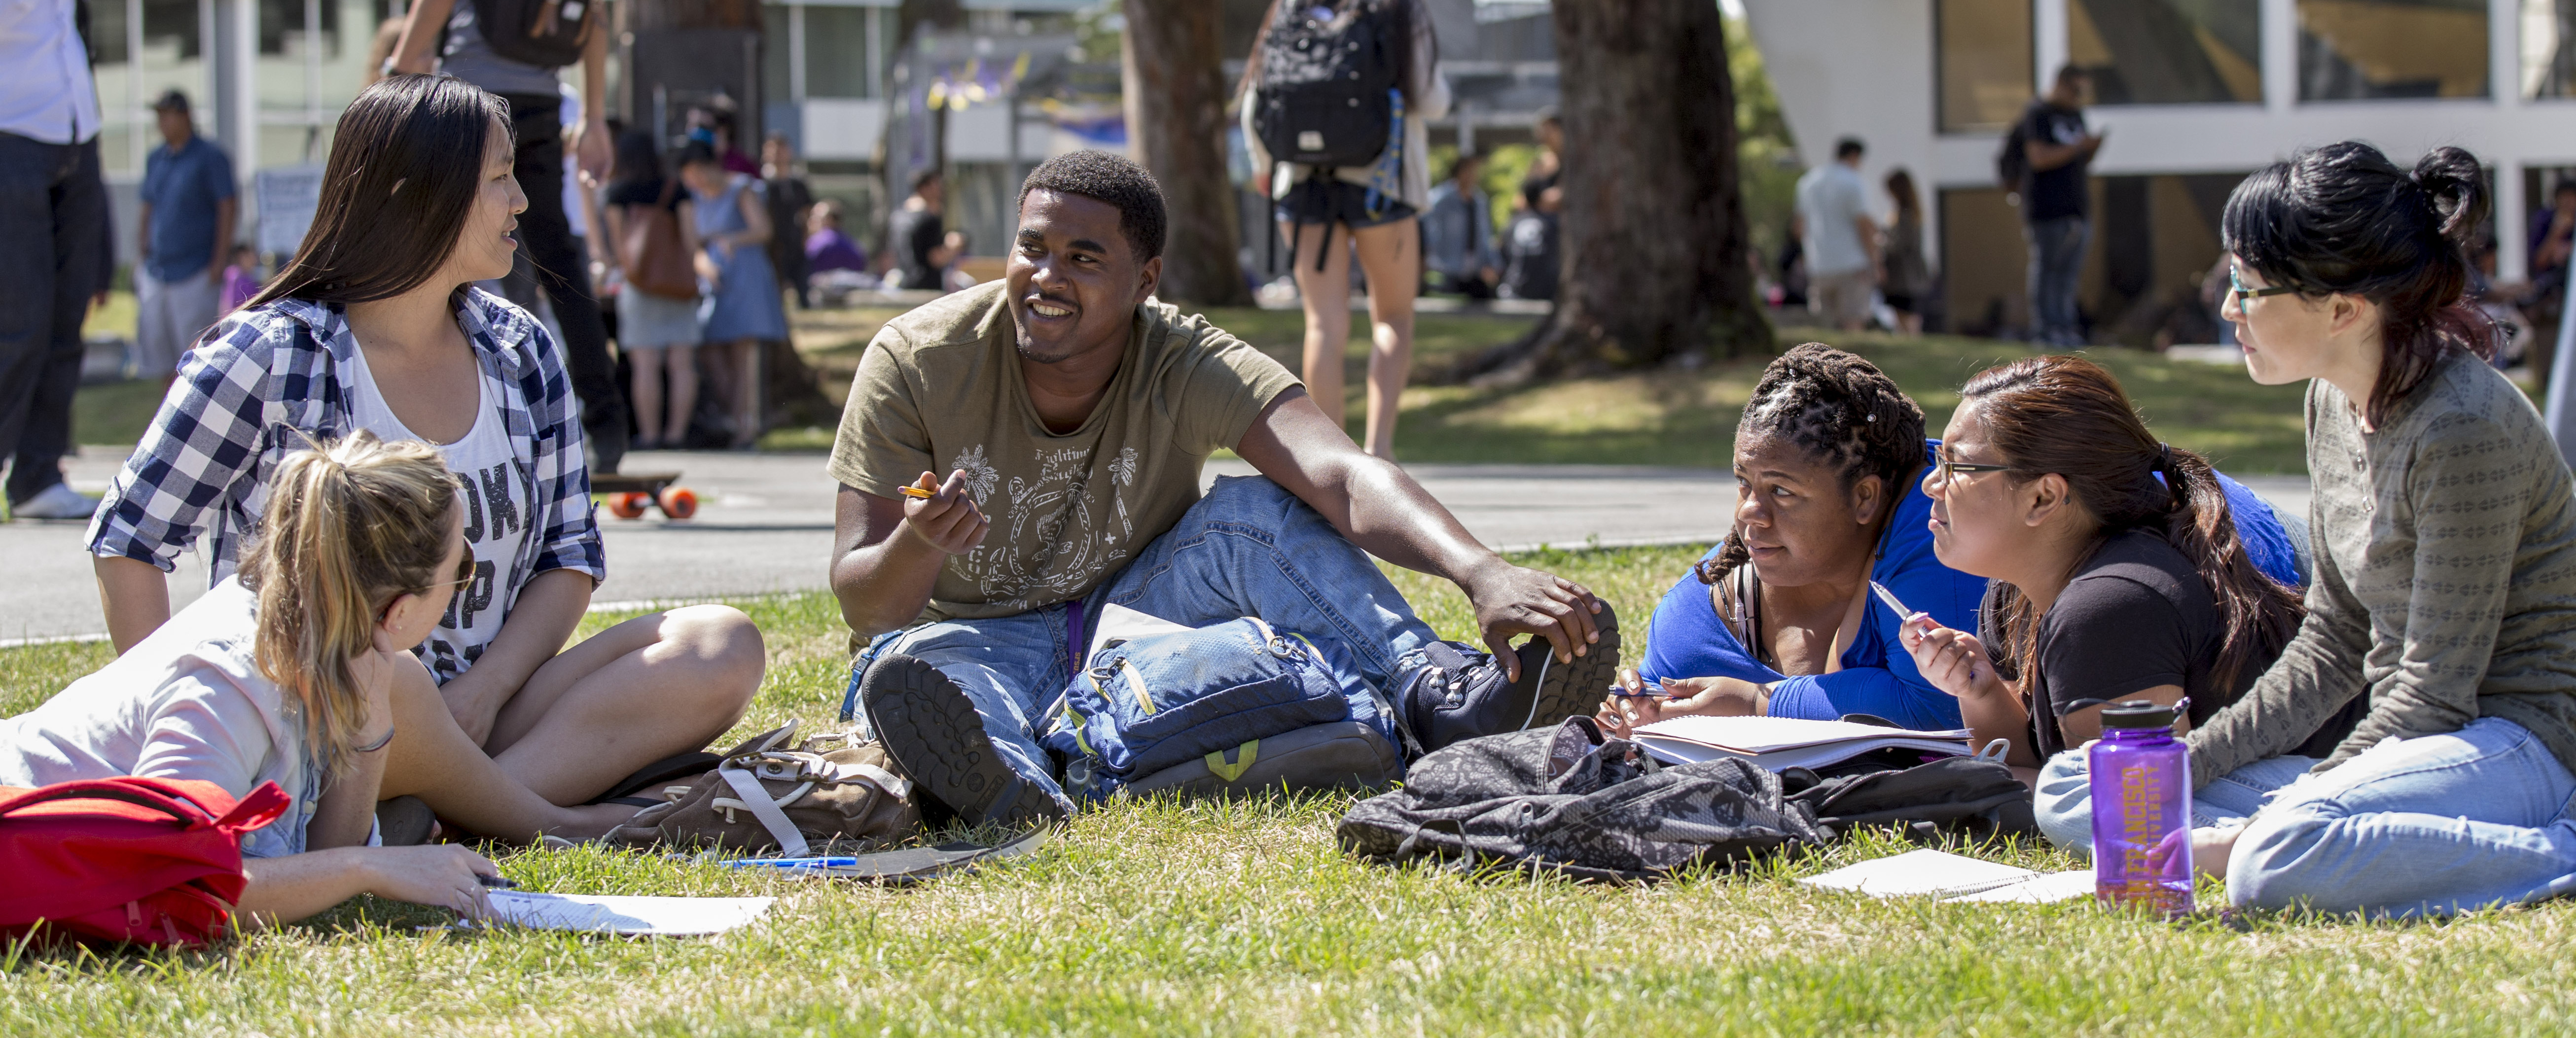 Students spending time together on campus lawn